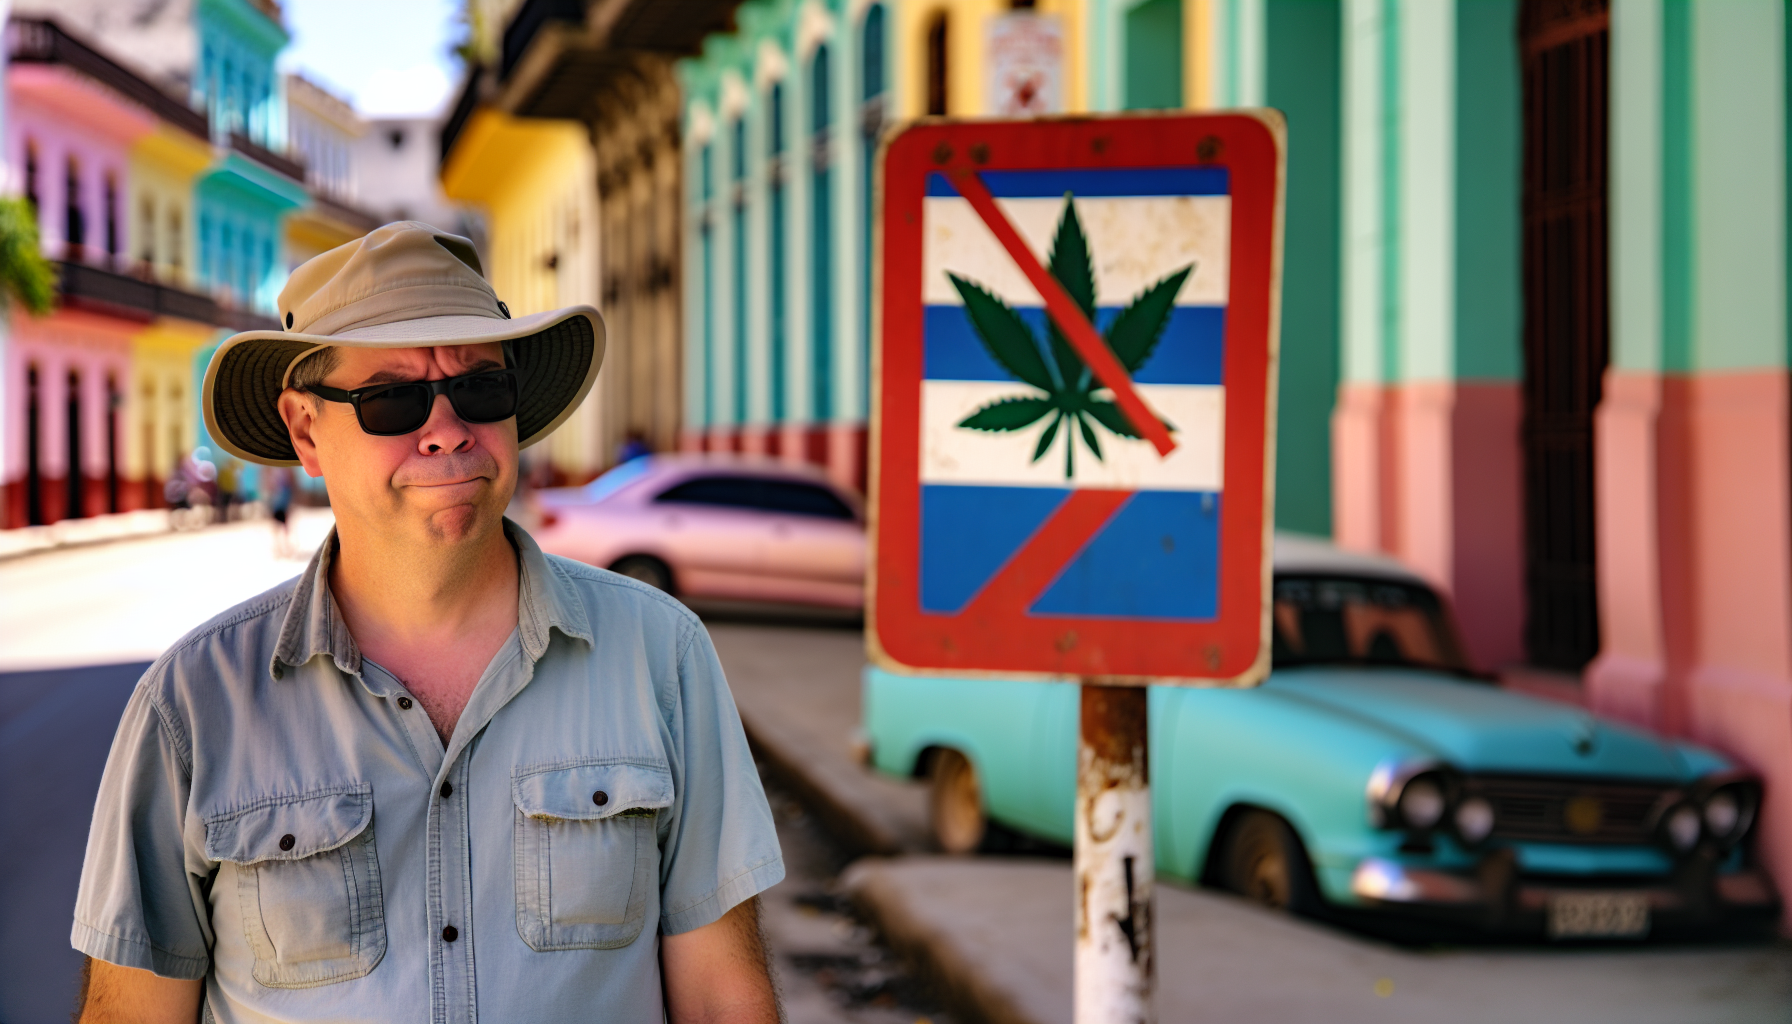 Tourist with caution sign in Cuba